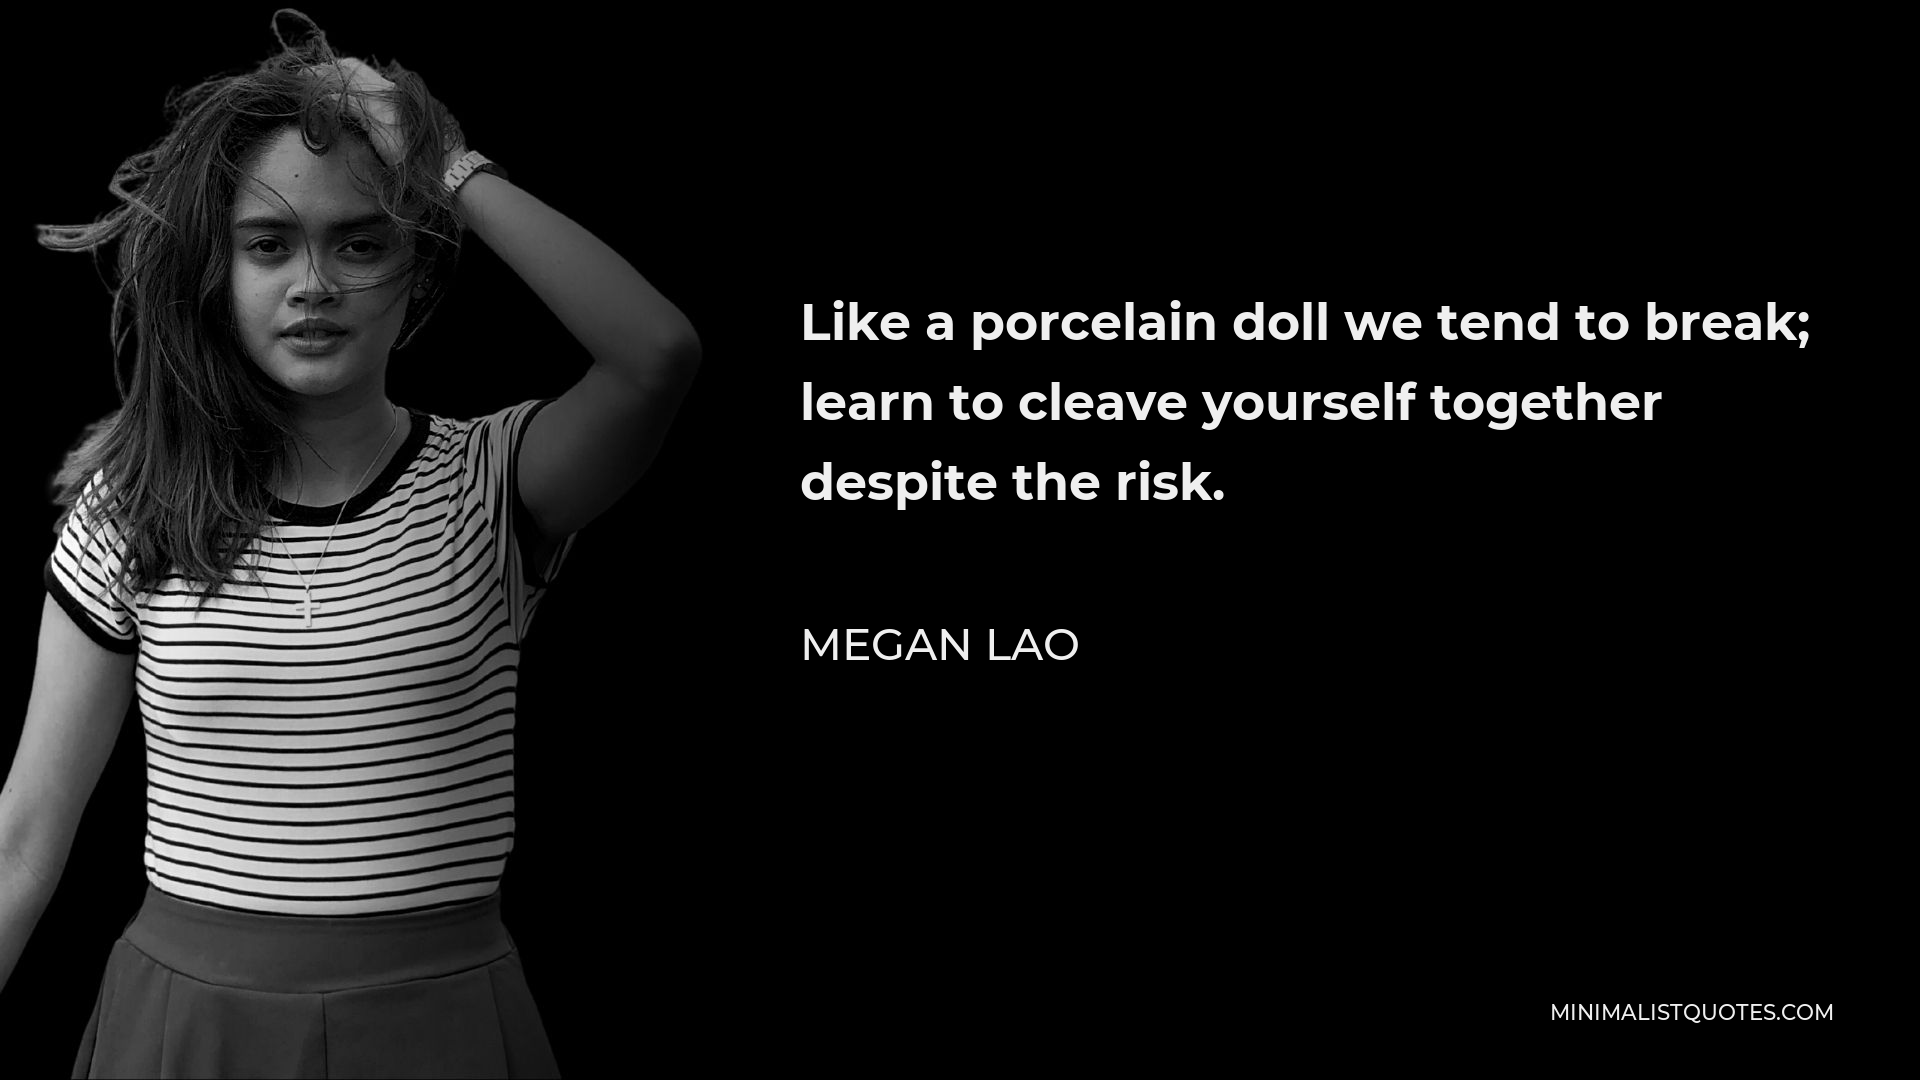 Megan Lao Quote - Like a porcelain doll we tend to break; learn to cleave yourself together despite the risk.